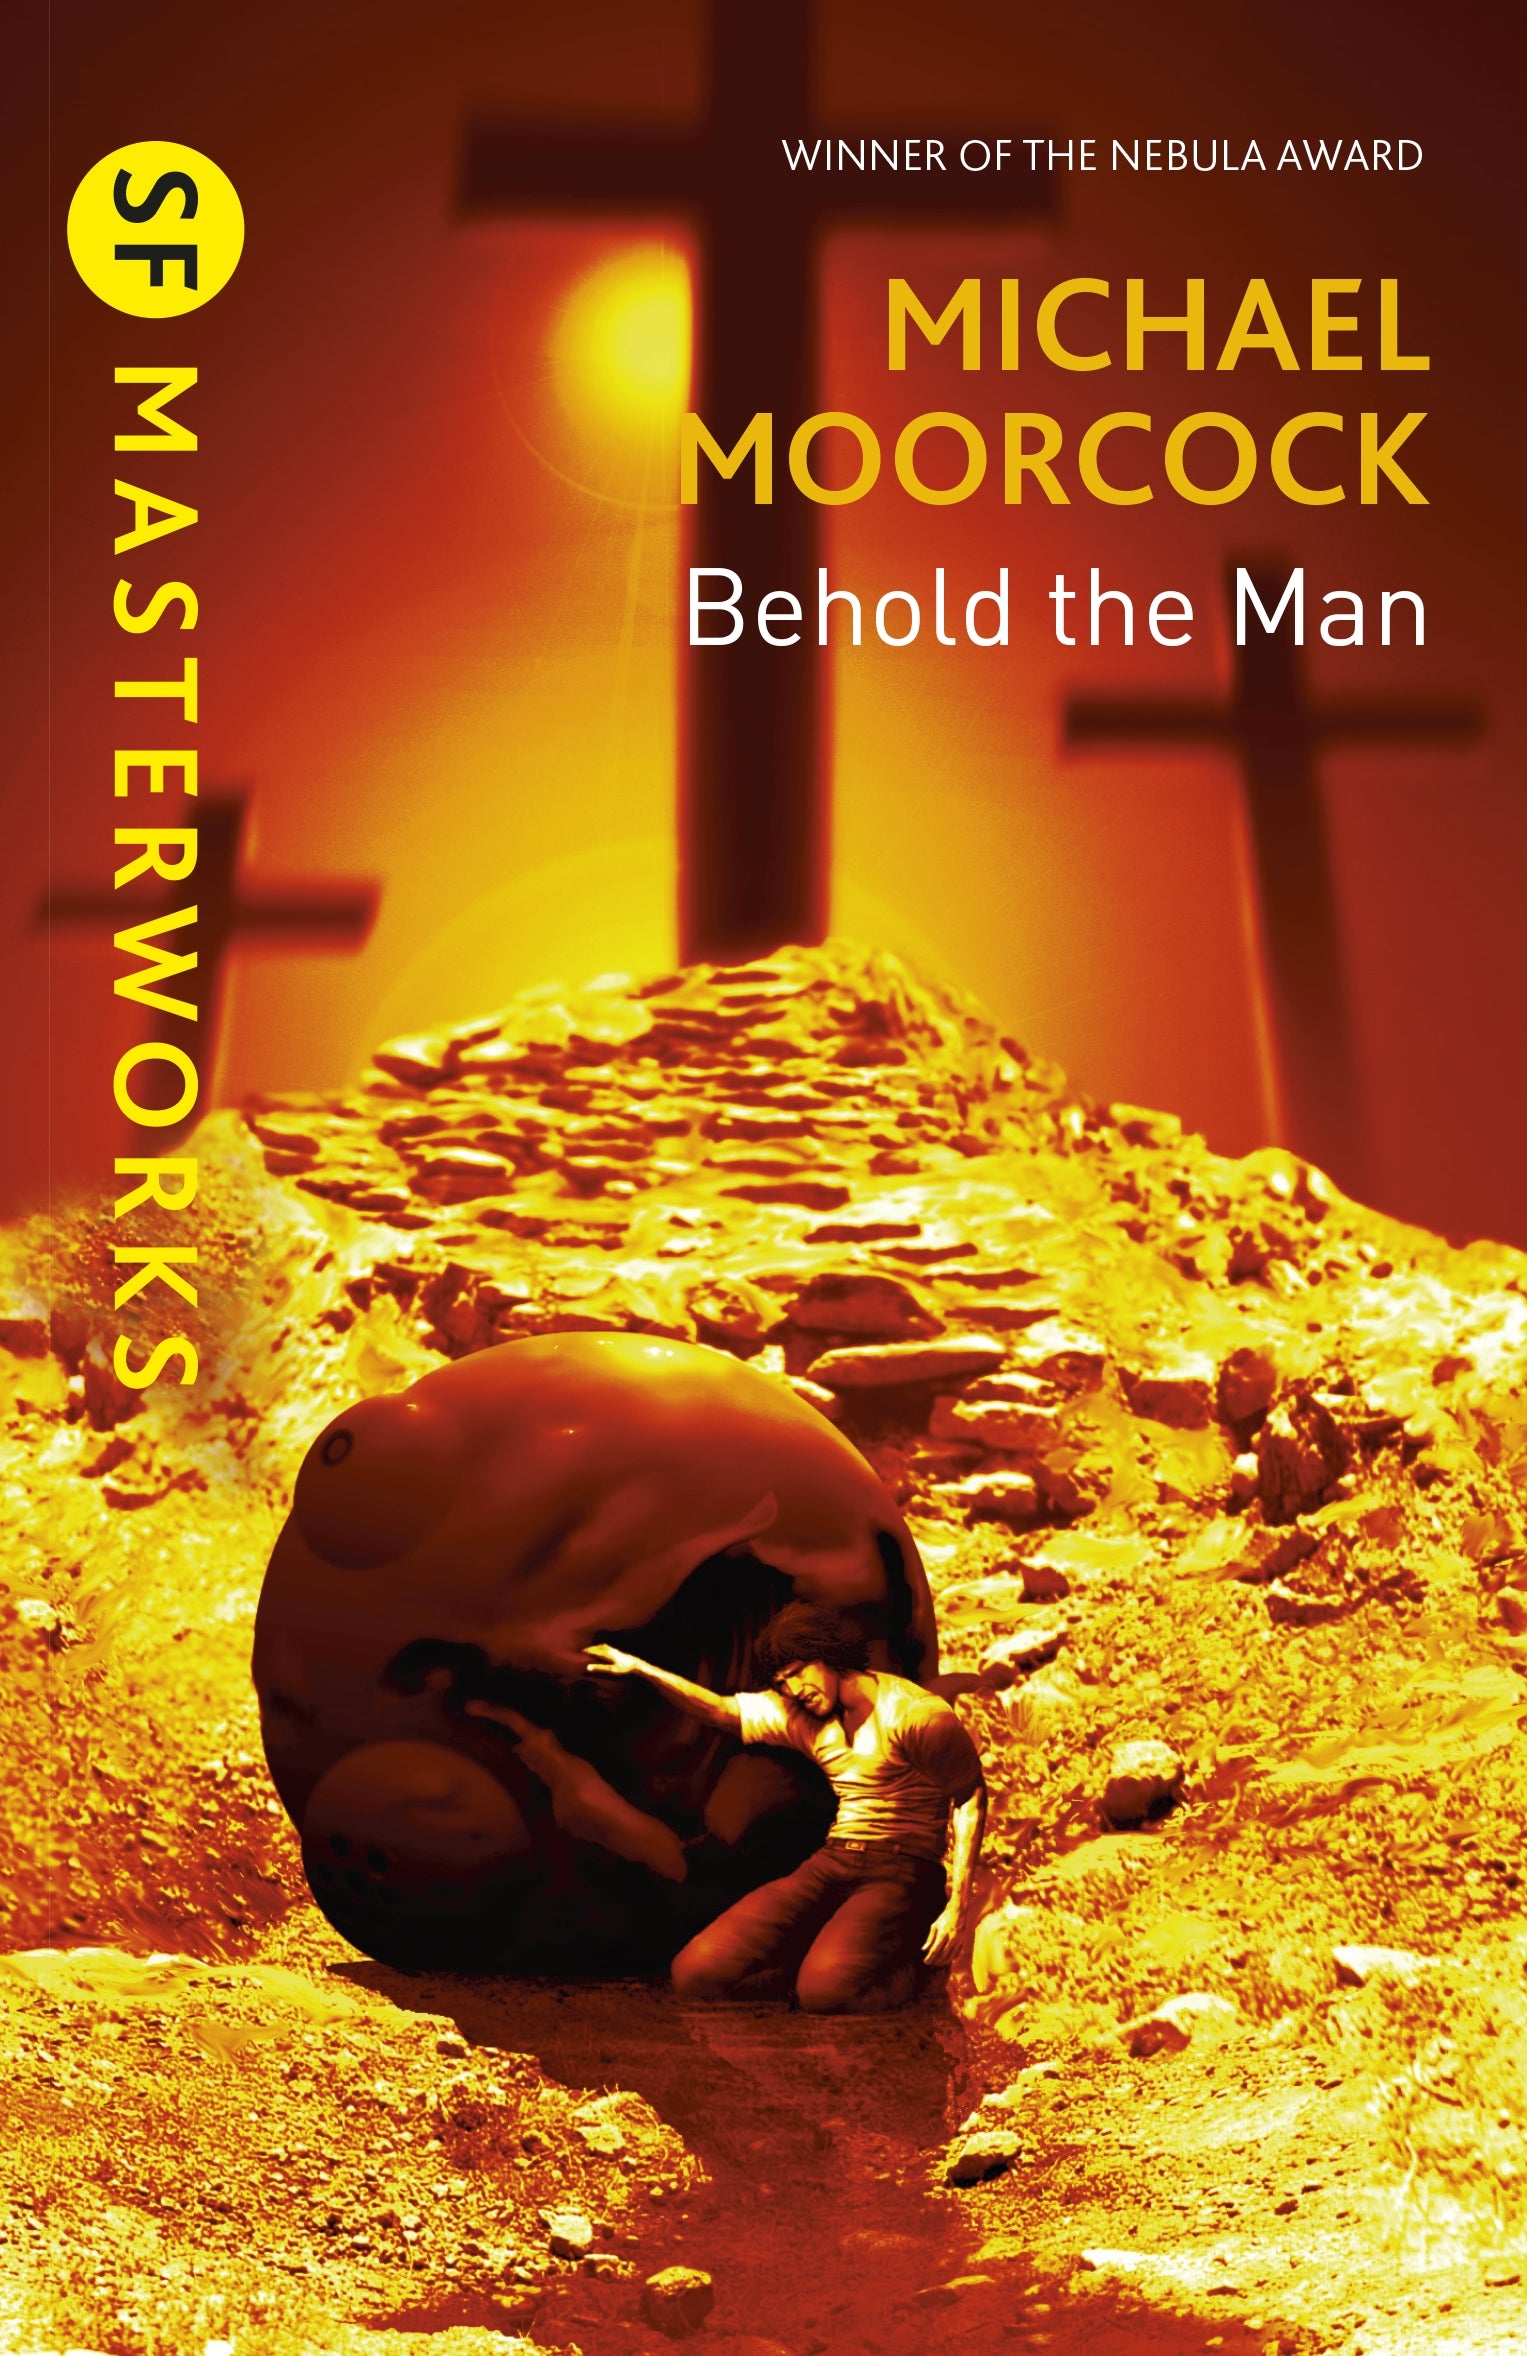 Behold The Man by Michael Moorcock